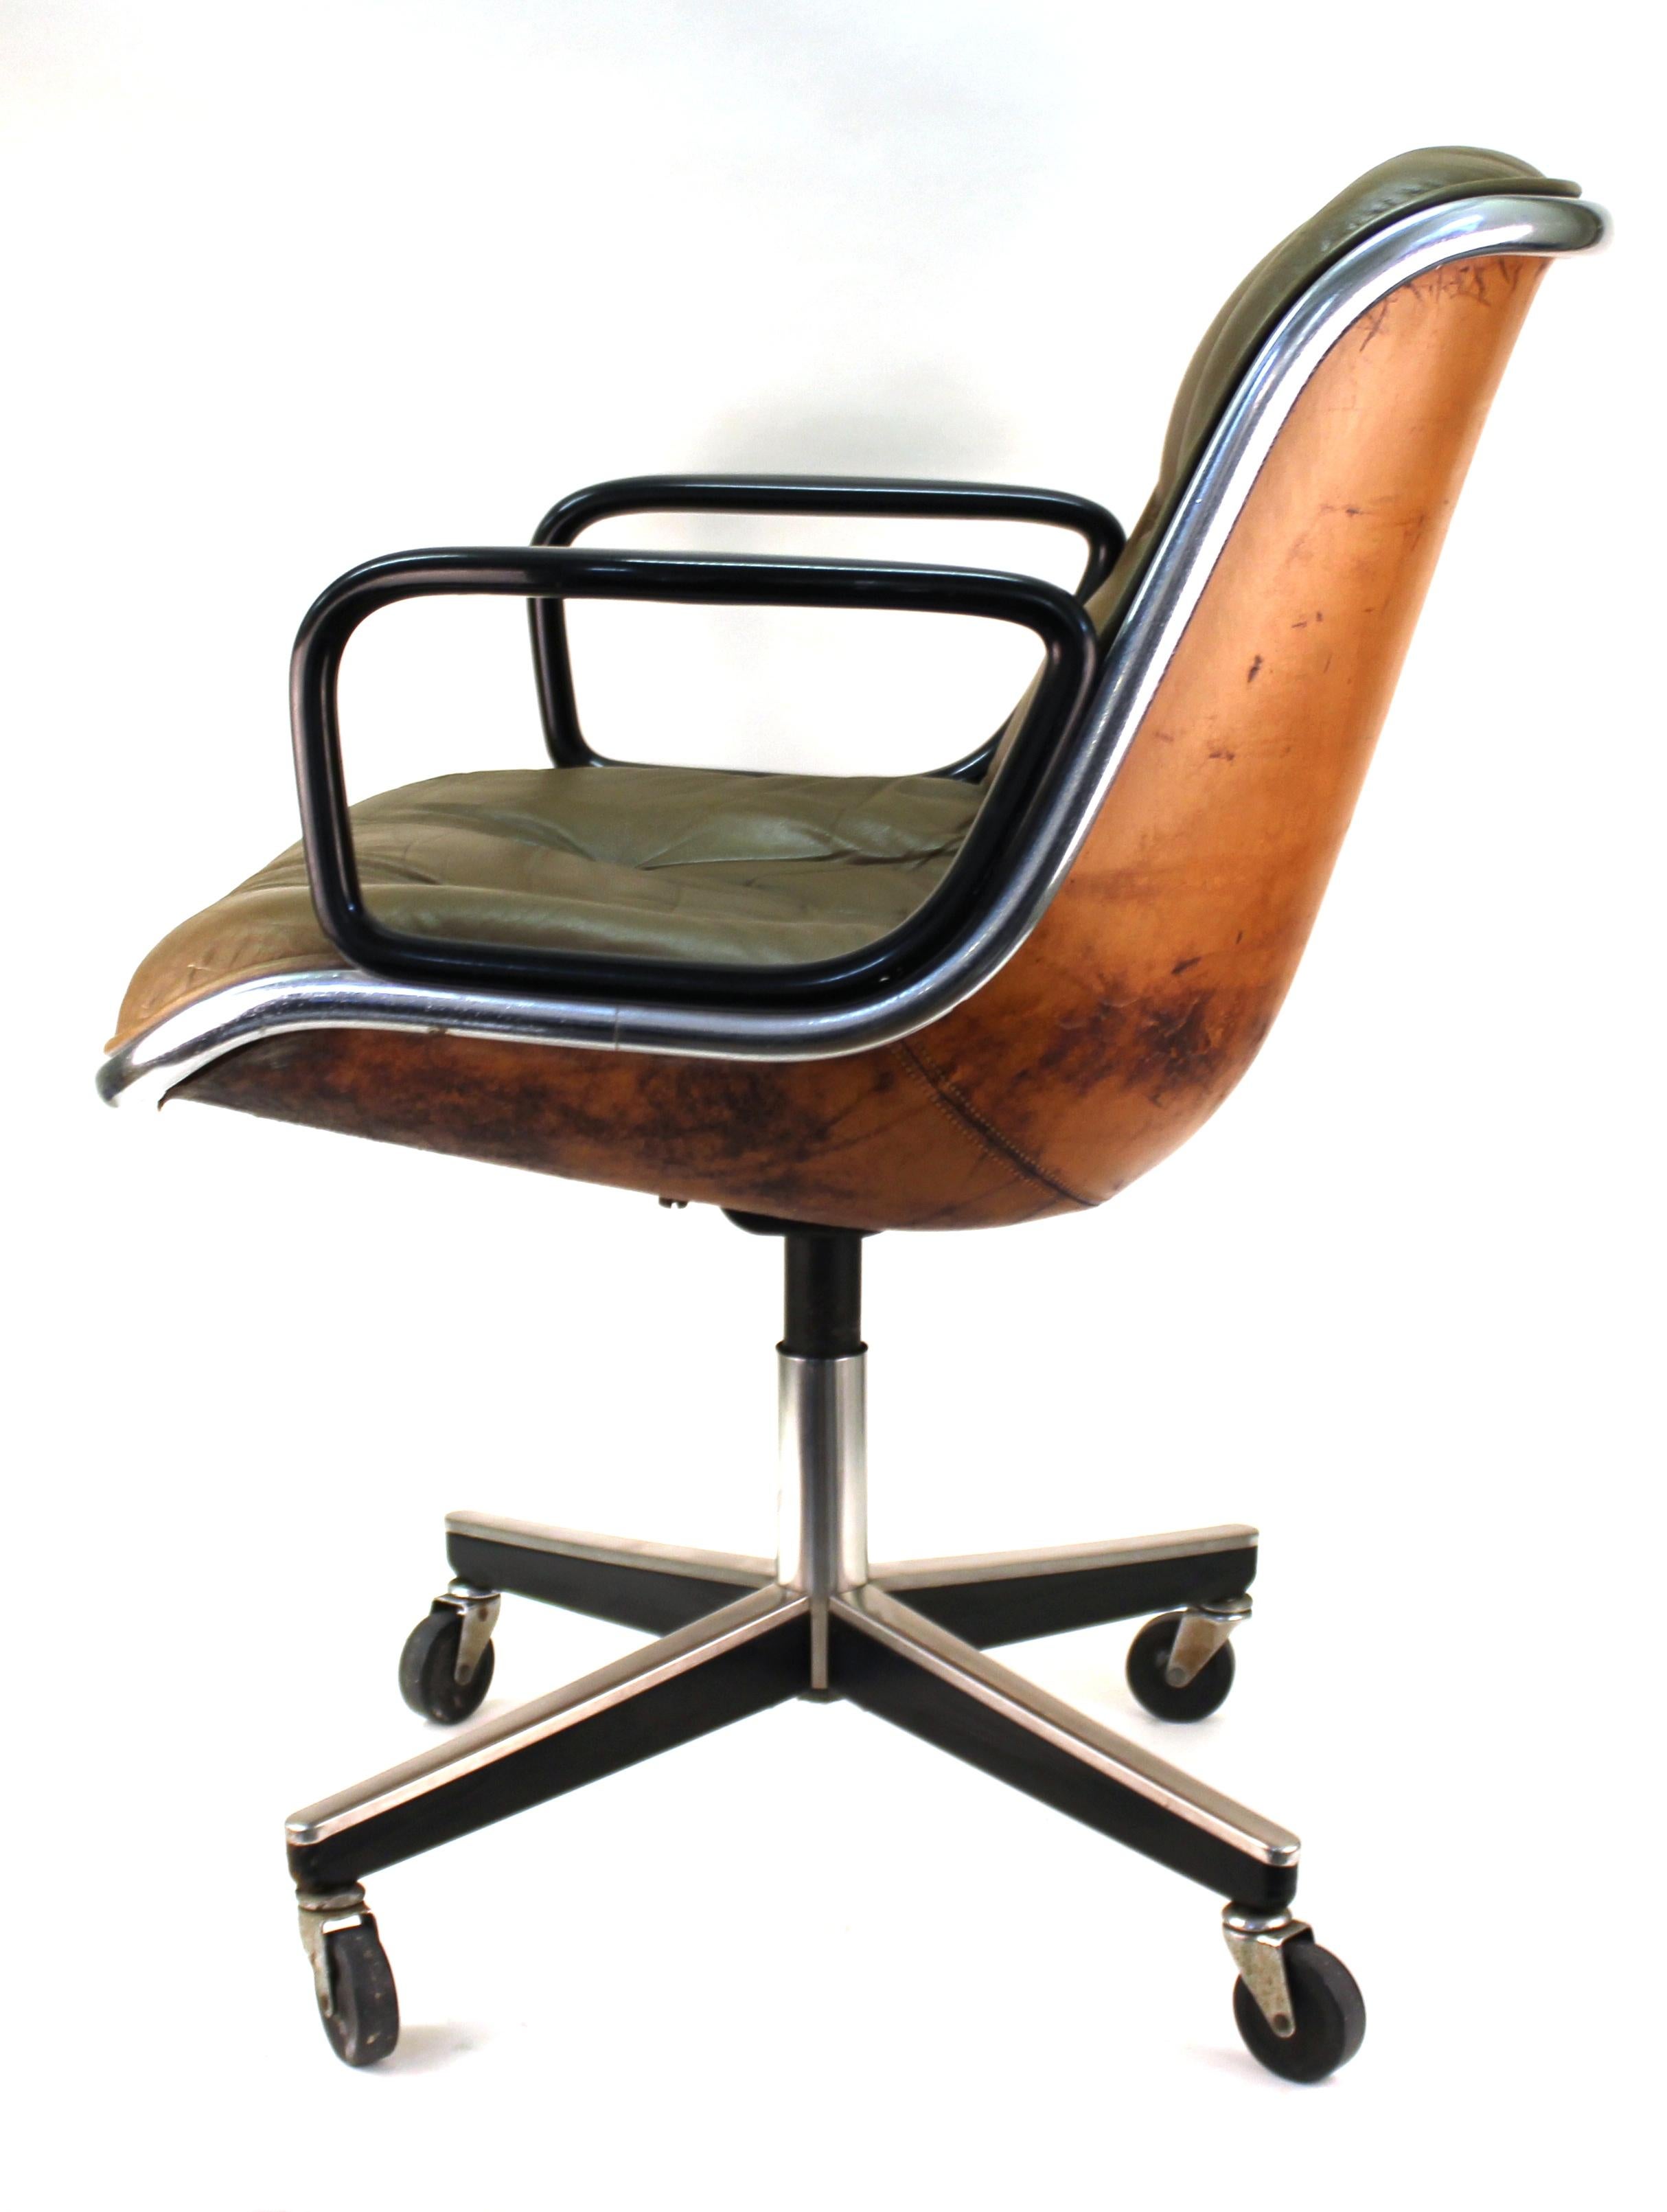 American modern executive chair designed by Charles Pollock for Knoll in the 1960s. The piece has a leather covered plastic back, aluminum frame and a tufted leather seat. Original Knoll label on the bottom.
This is an original piece from the 1960s